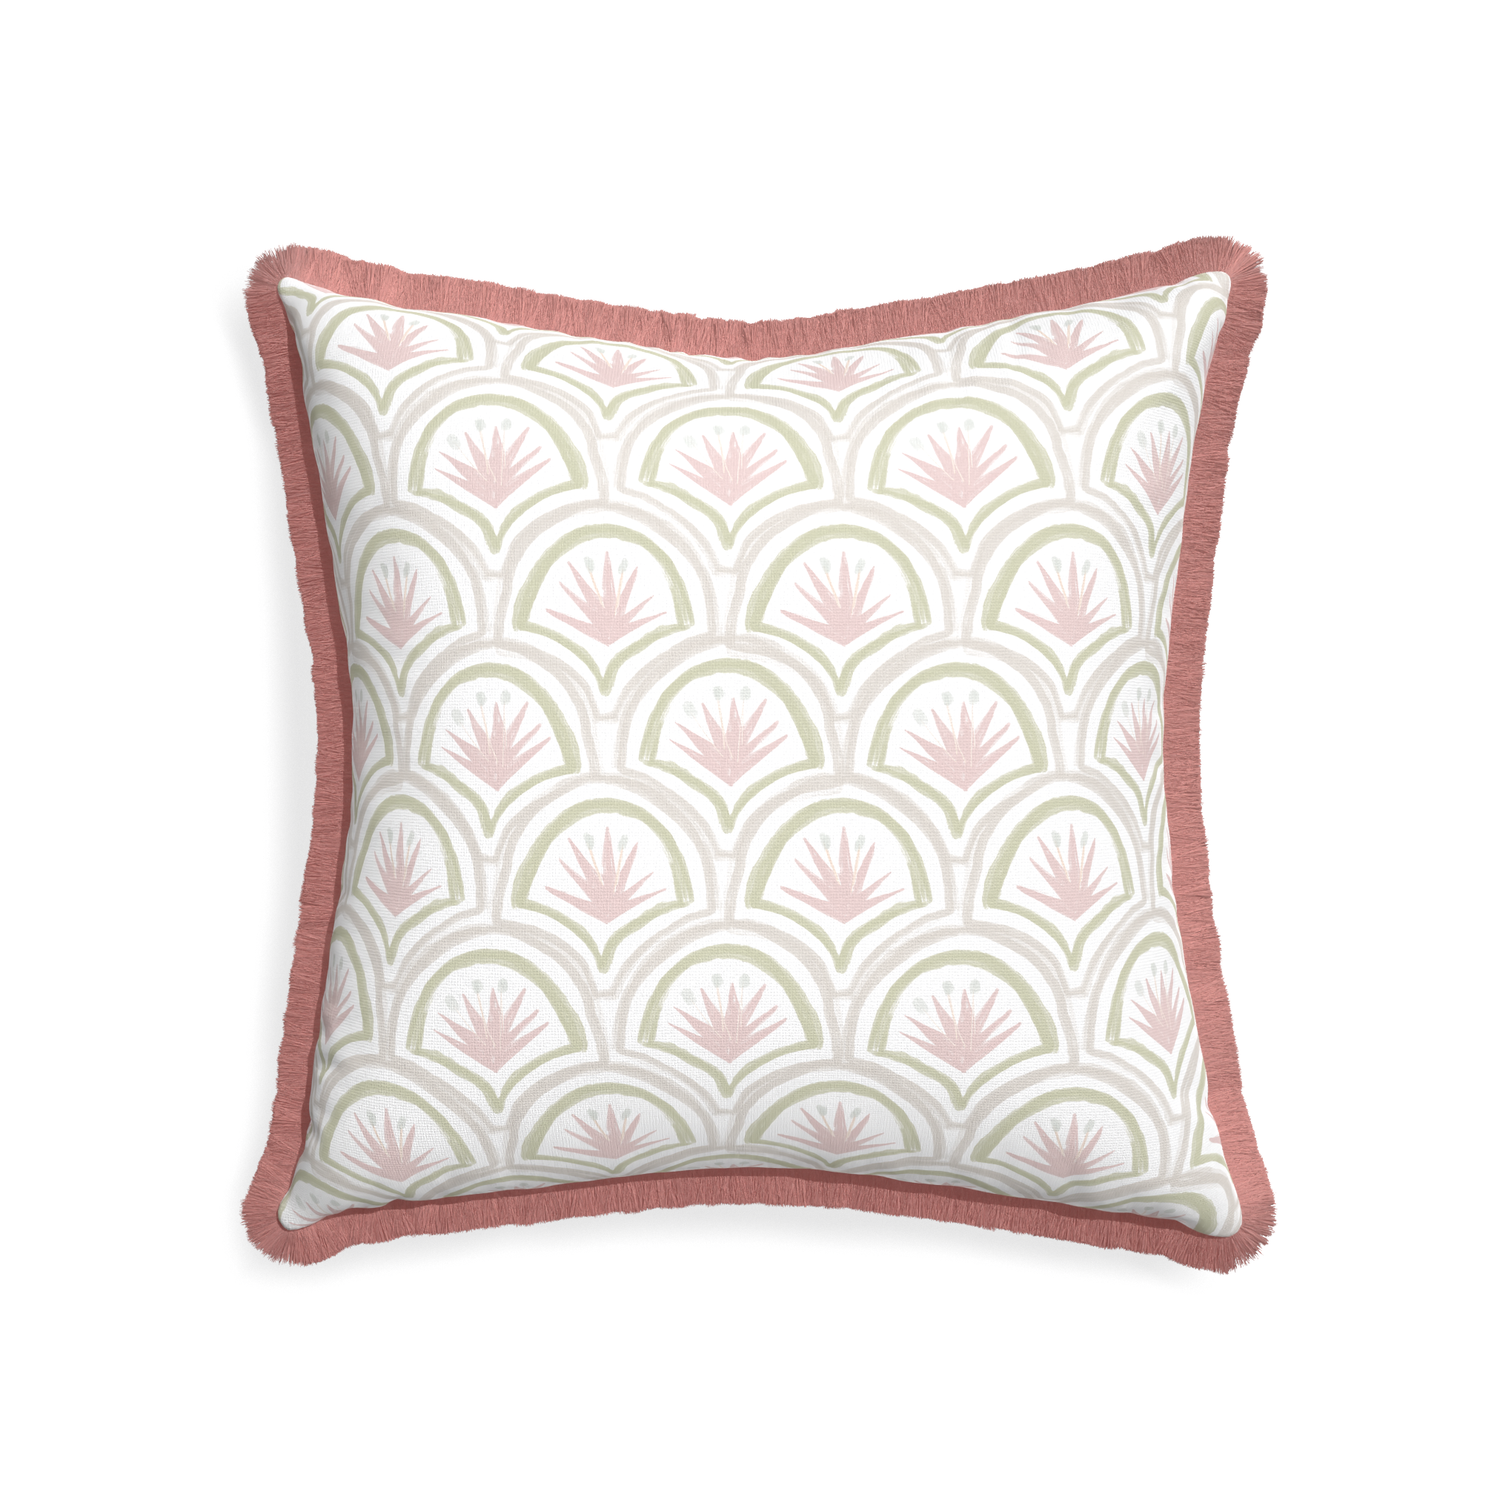 22-square thatcher rose custom pink & green palmpillow with d fringe on white background